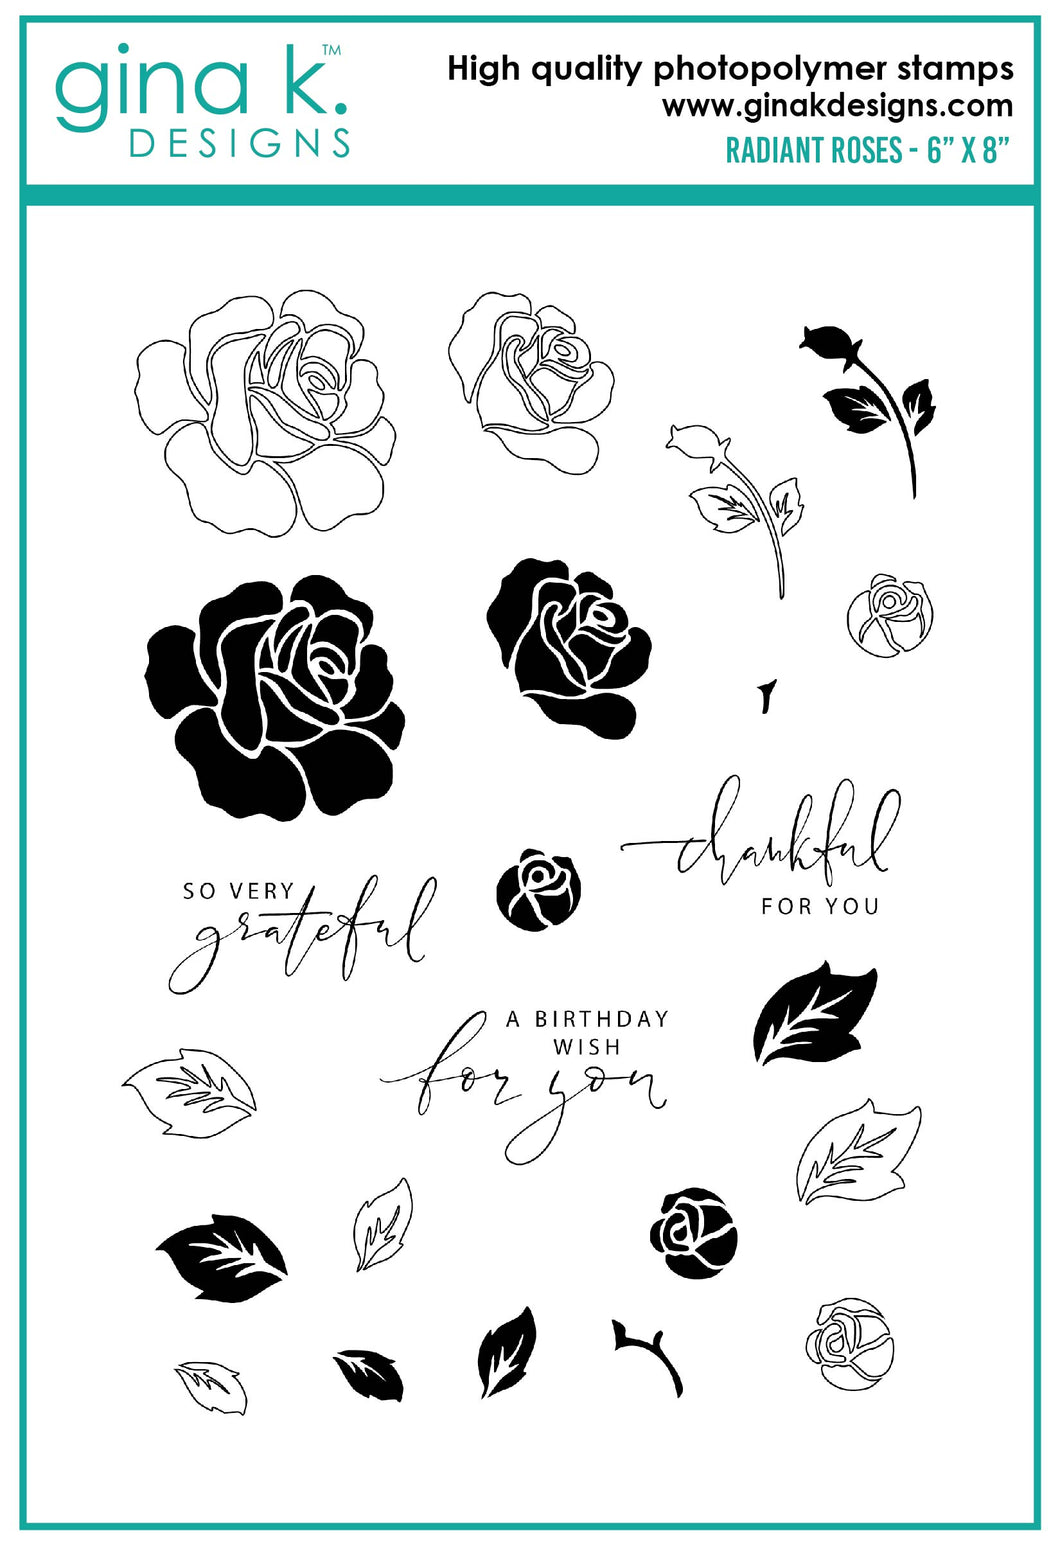 Gina K. Designs - Stamp & Die Set - Radiant Roses. This set is by Gina K Designs. The stamp set is made of premium clear photopolymer and measures 6